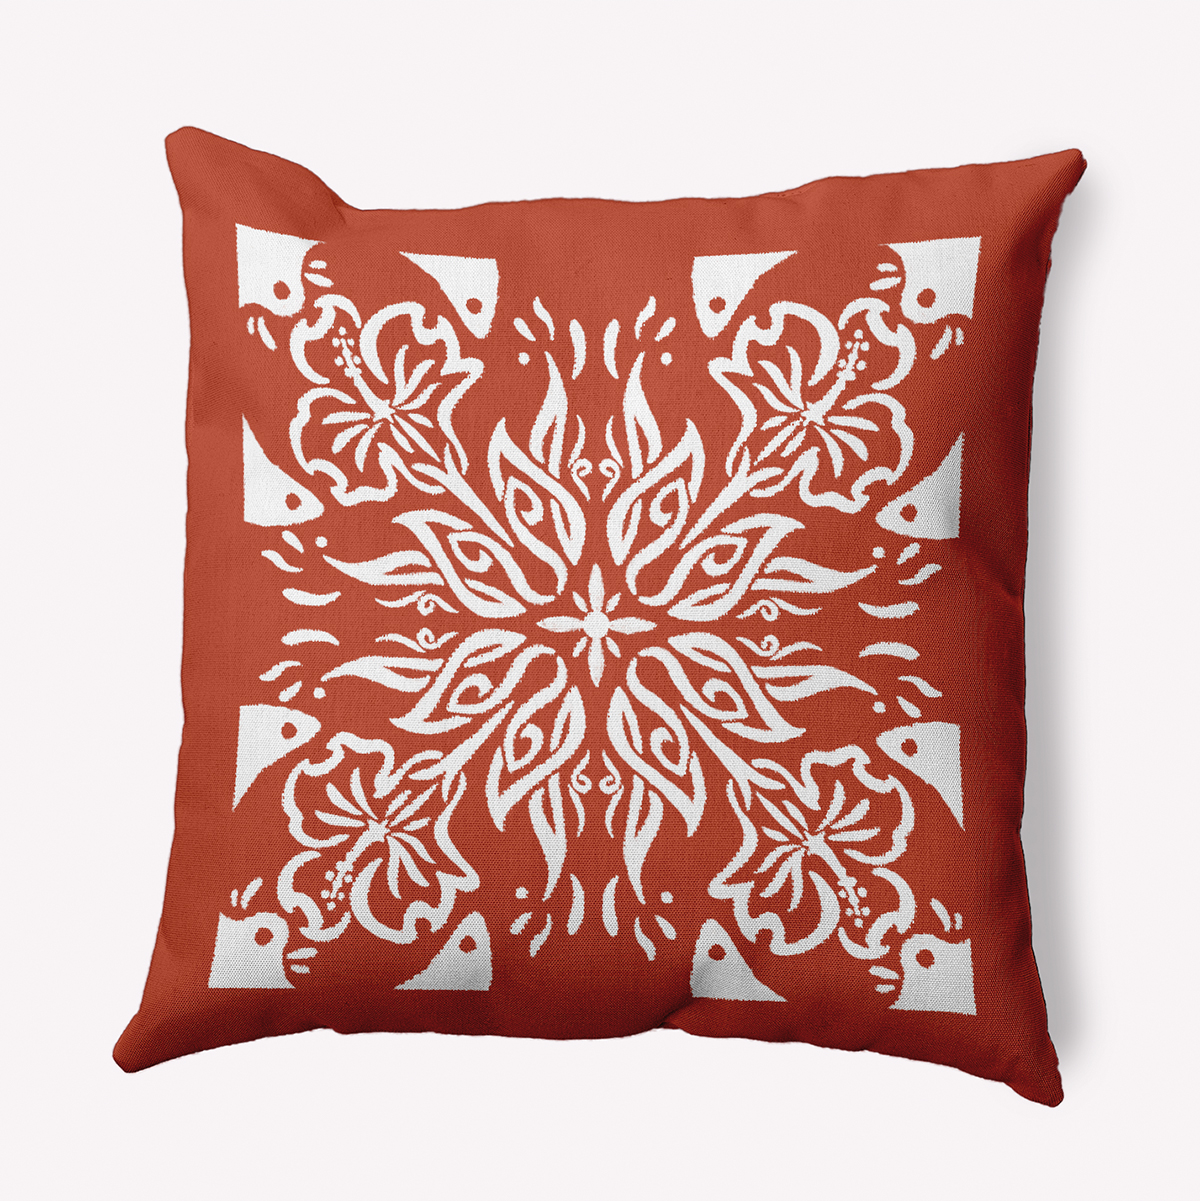 Contemporary Home Living 20" x 20" White and Orange Cuban Tile Throw Pillow